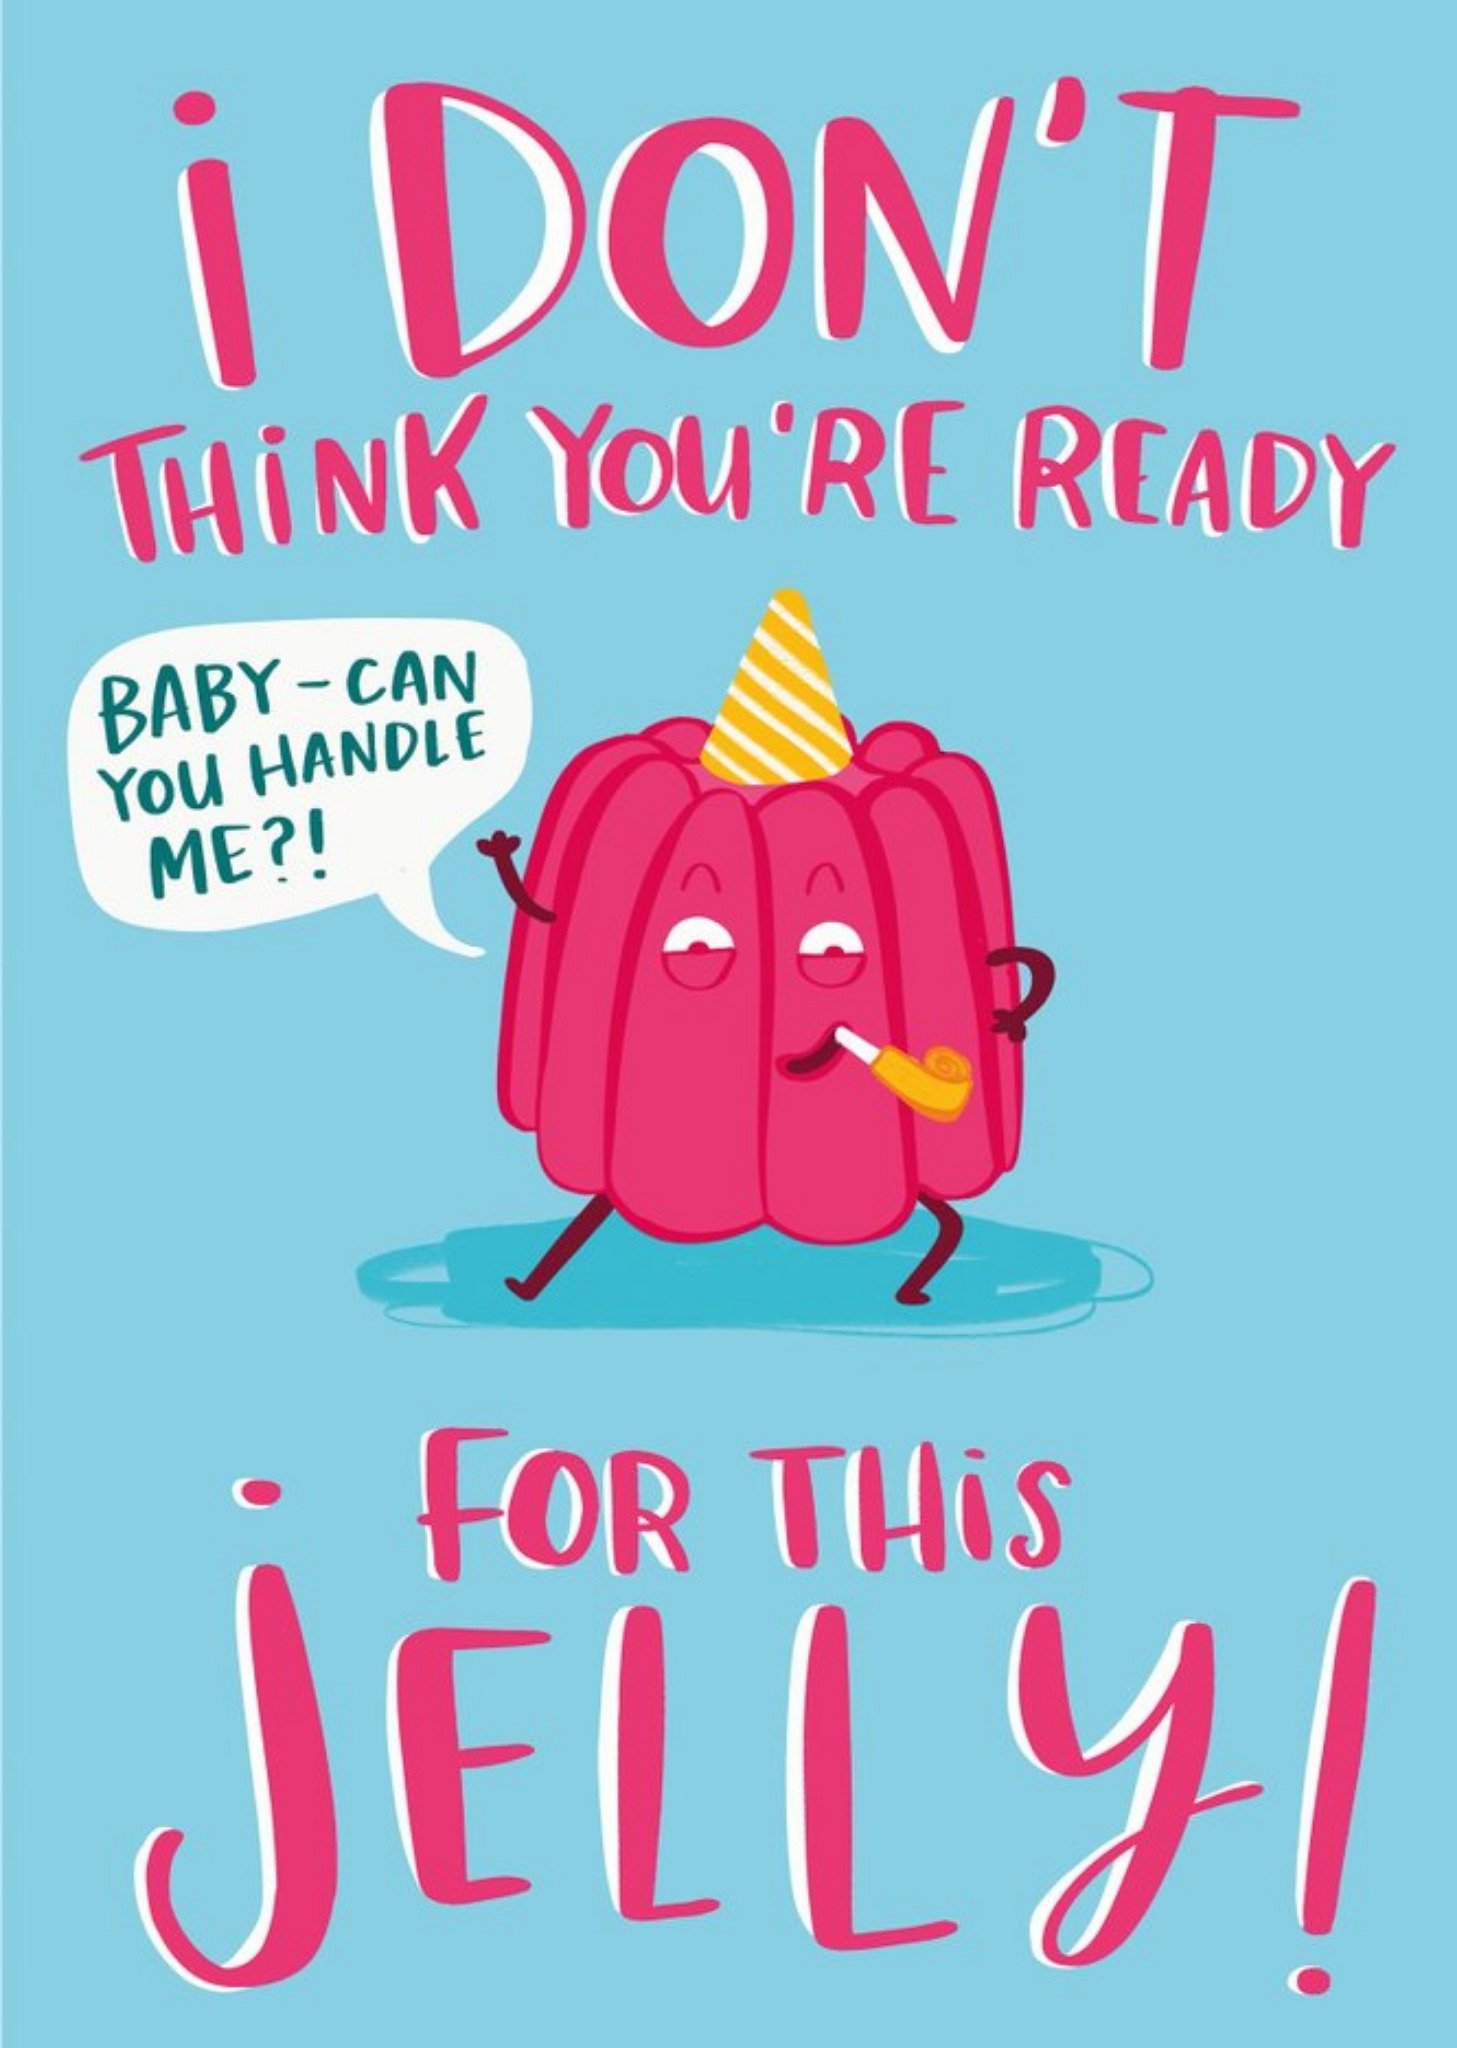 Moonpig Lucy Maggie Ready For This Jelly Funny Birthday Card Ecard